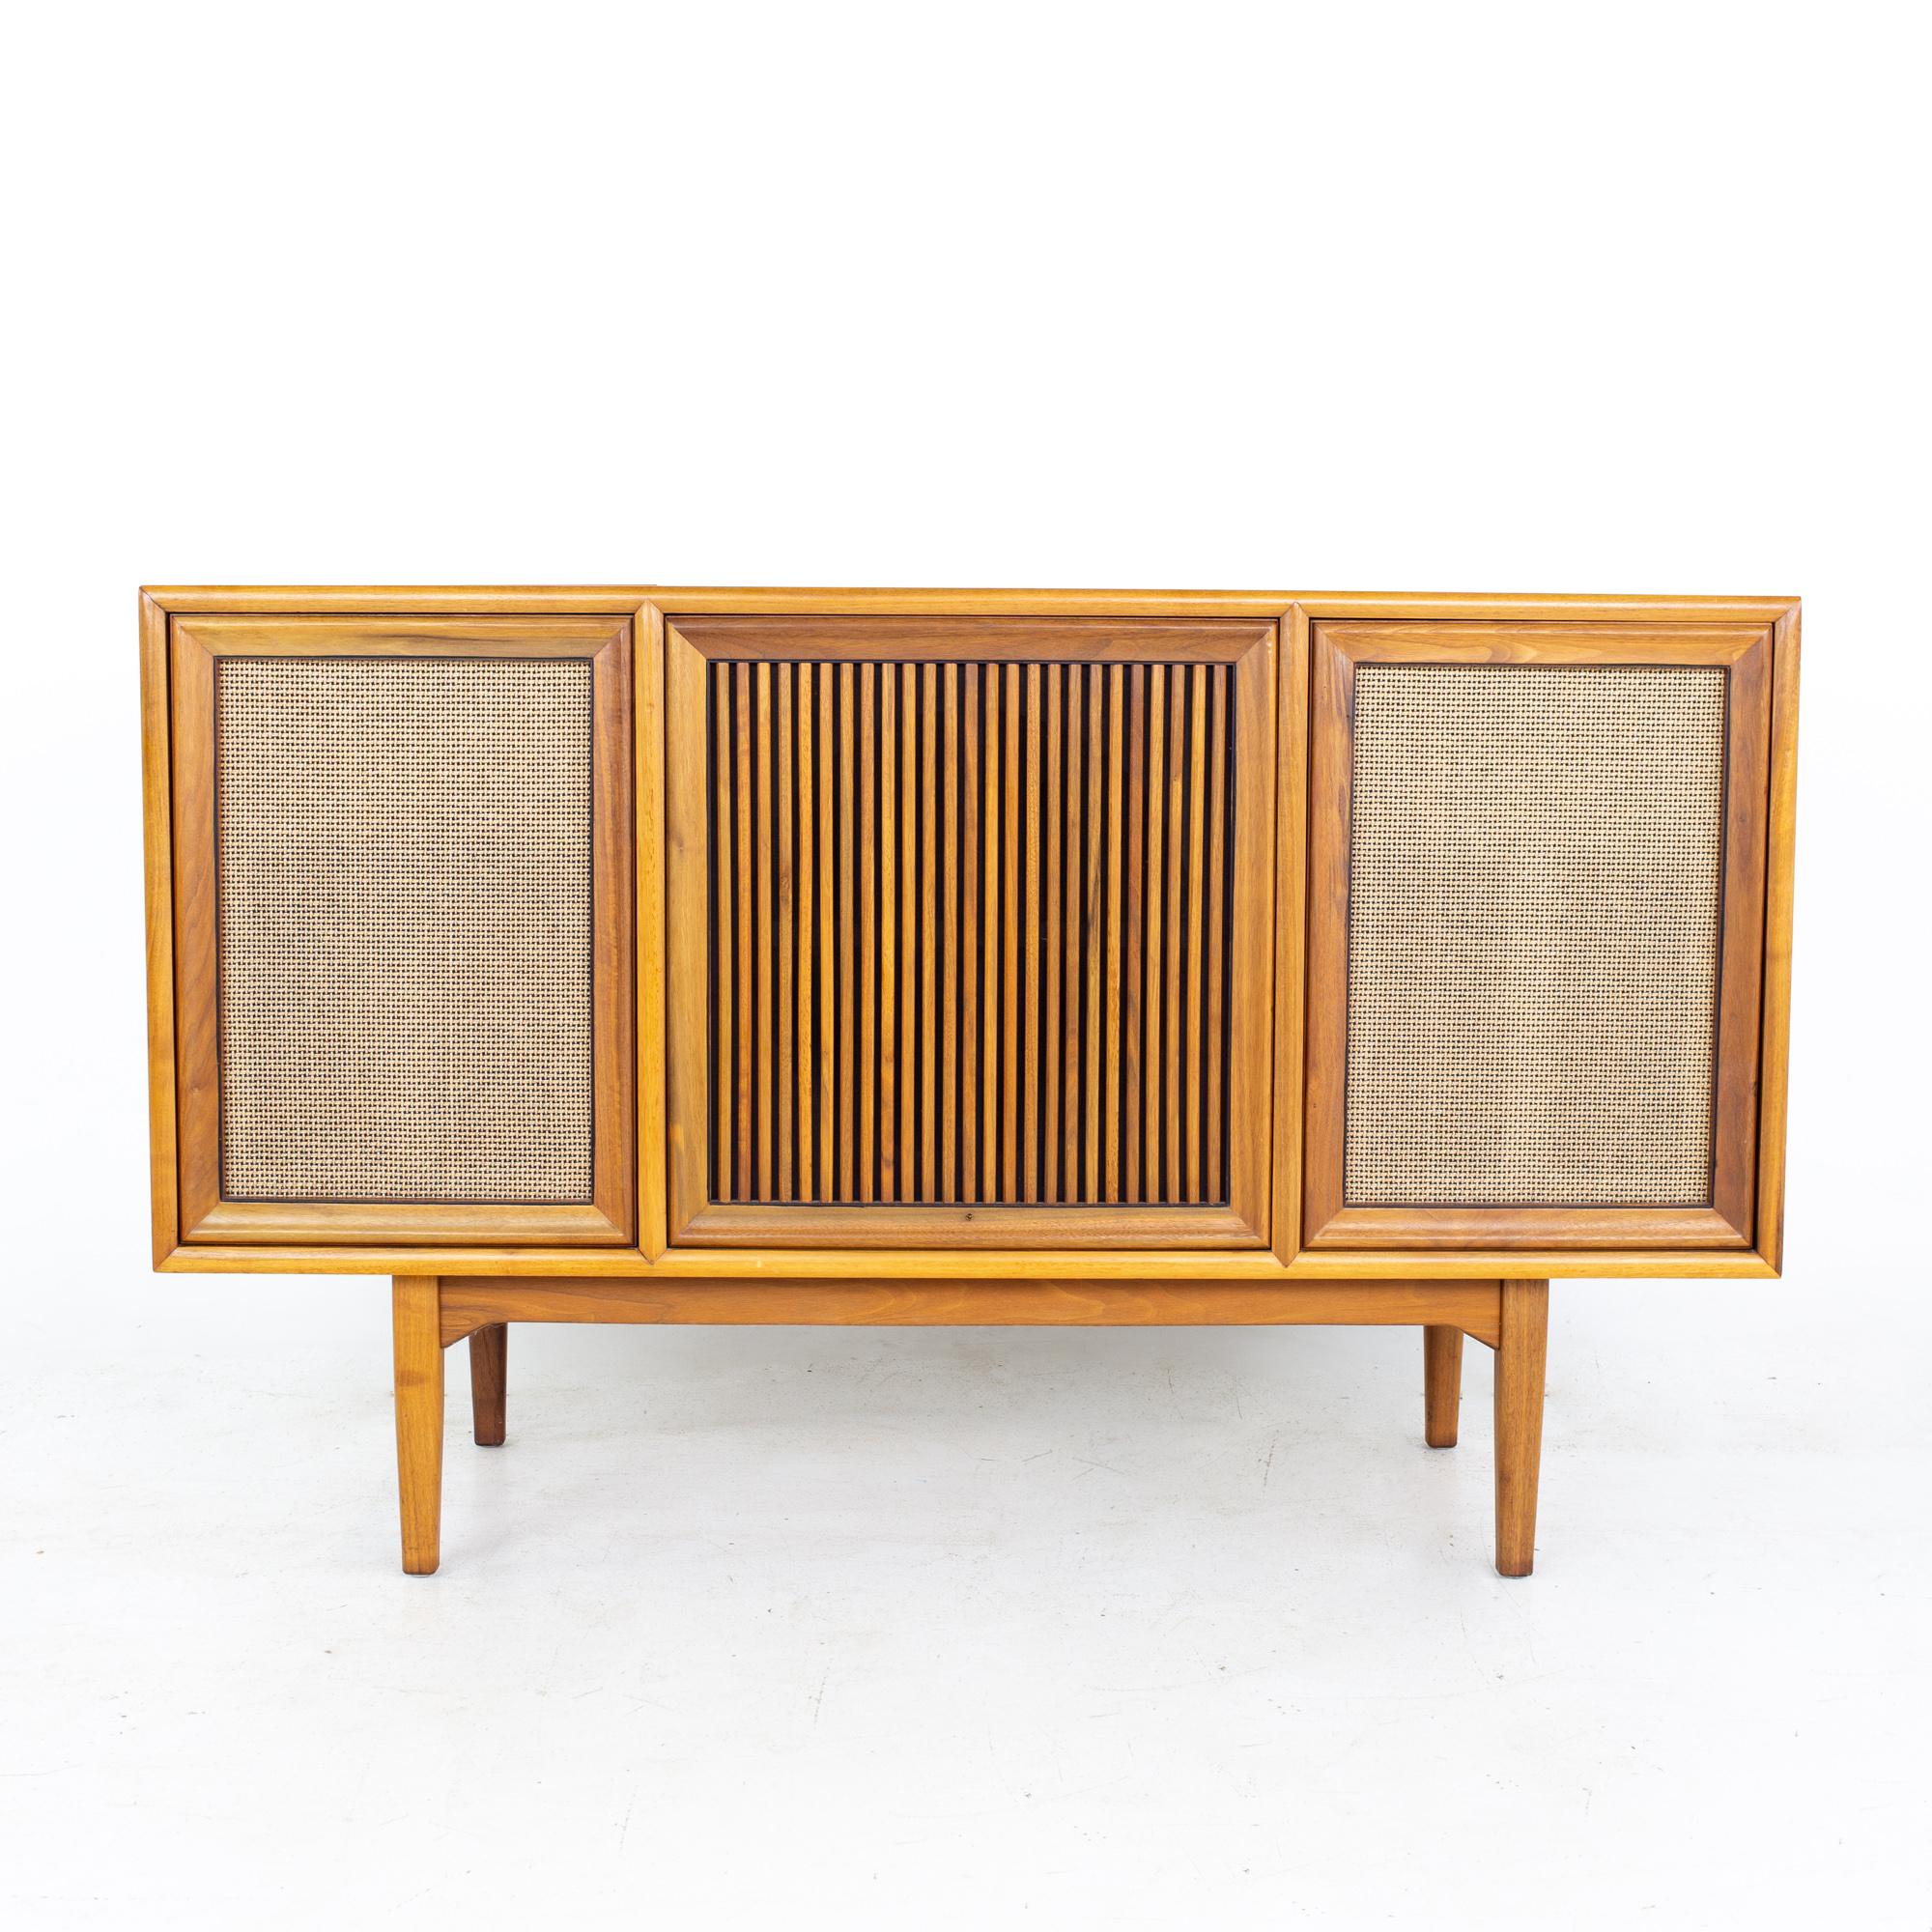 Kipp Stewart for Drexel Declarations Motorola mid century walnut stereo console
Console measures: 50.5 wide x 20 deep x 31 inches high

All pieces of furniture can be had in what we call restored vintage condition. That means the piece is